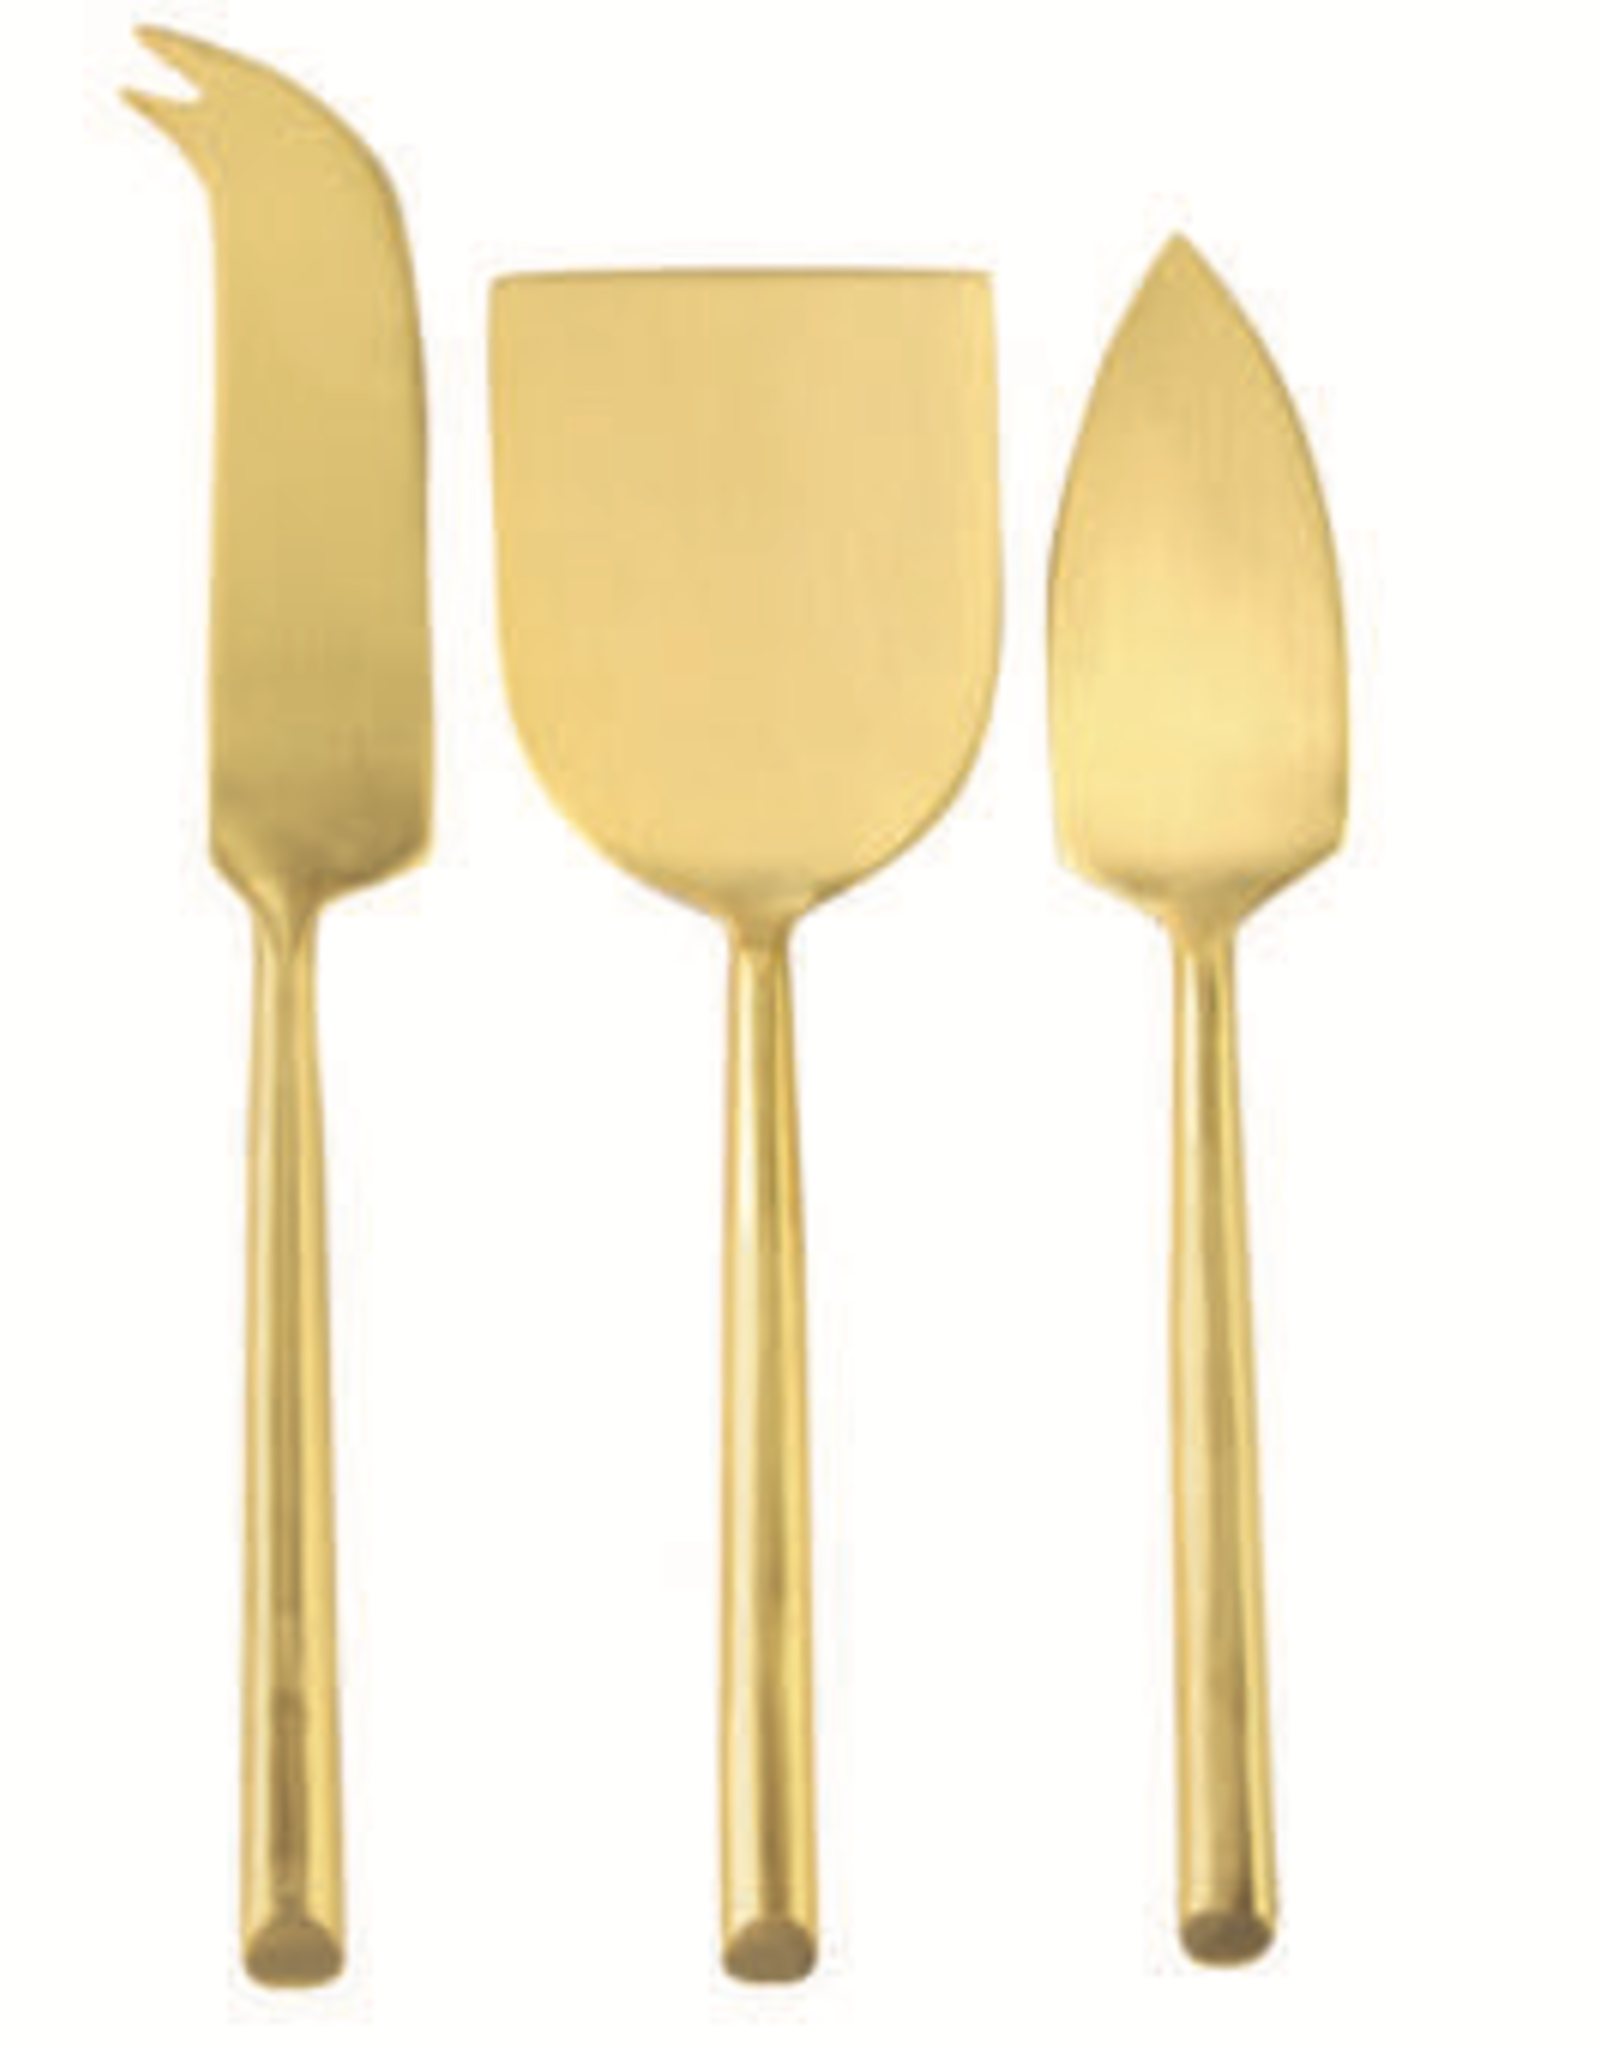 Matte Gold Cheese Knives - Set of 3